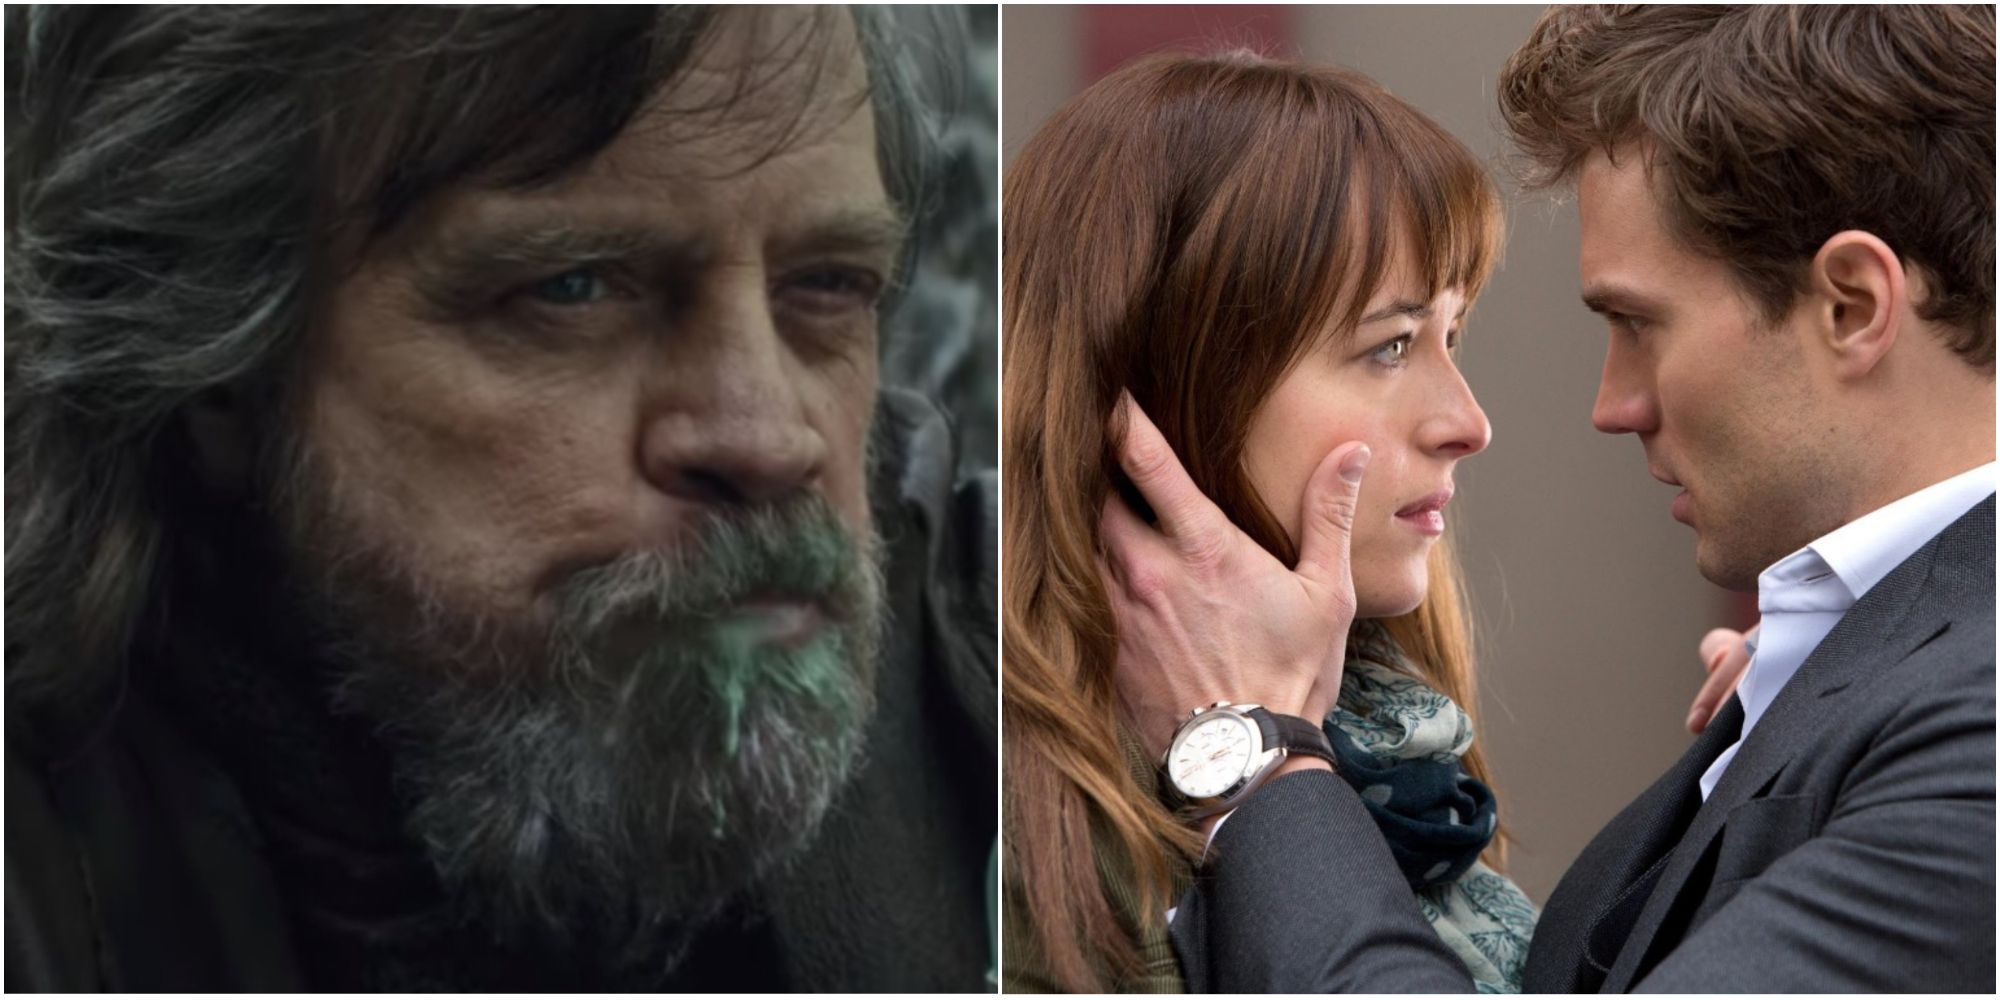 Star Wars: The Last Jedi and 50 Shades of Grey